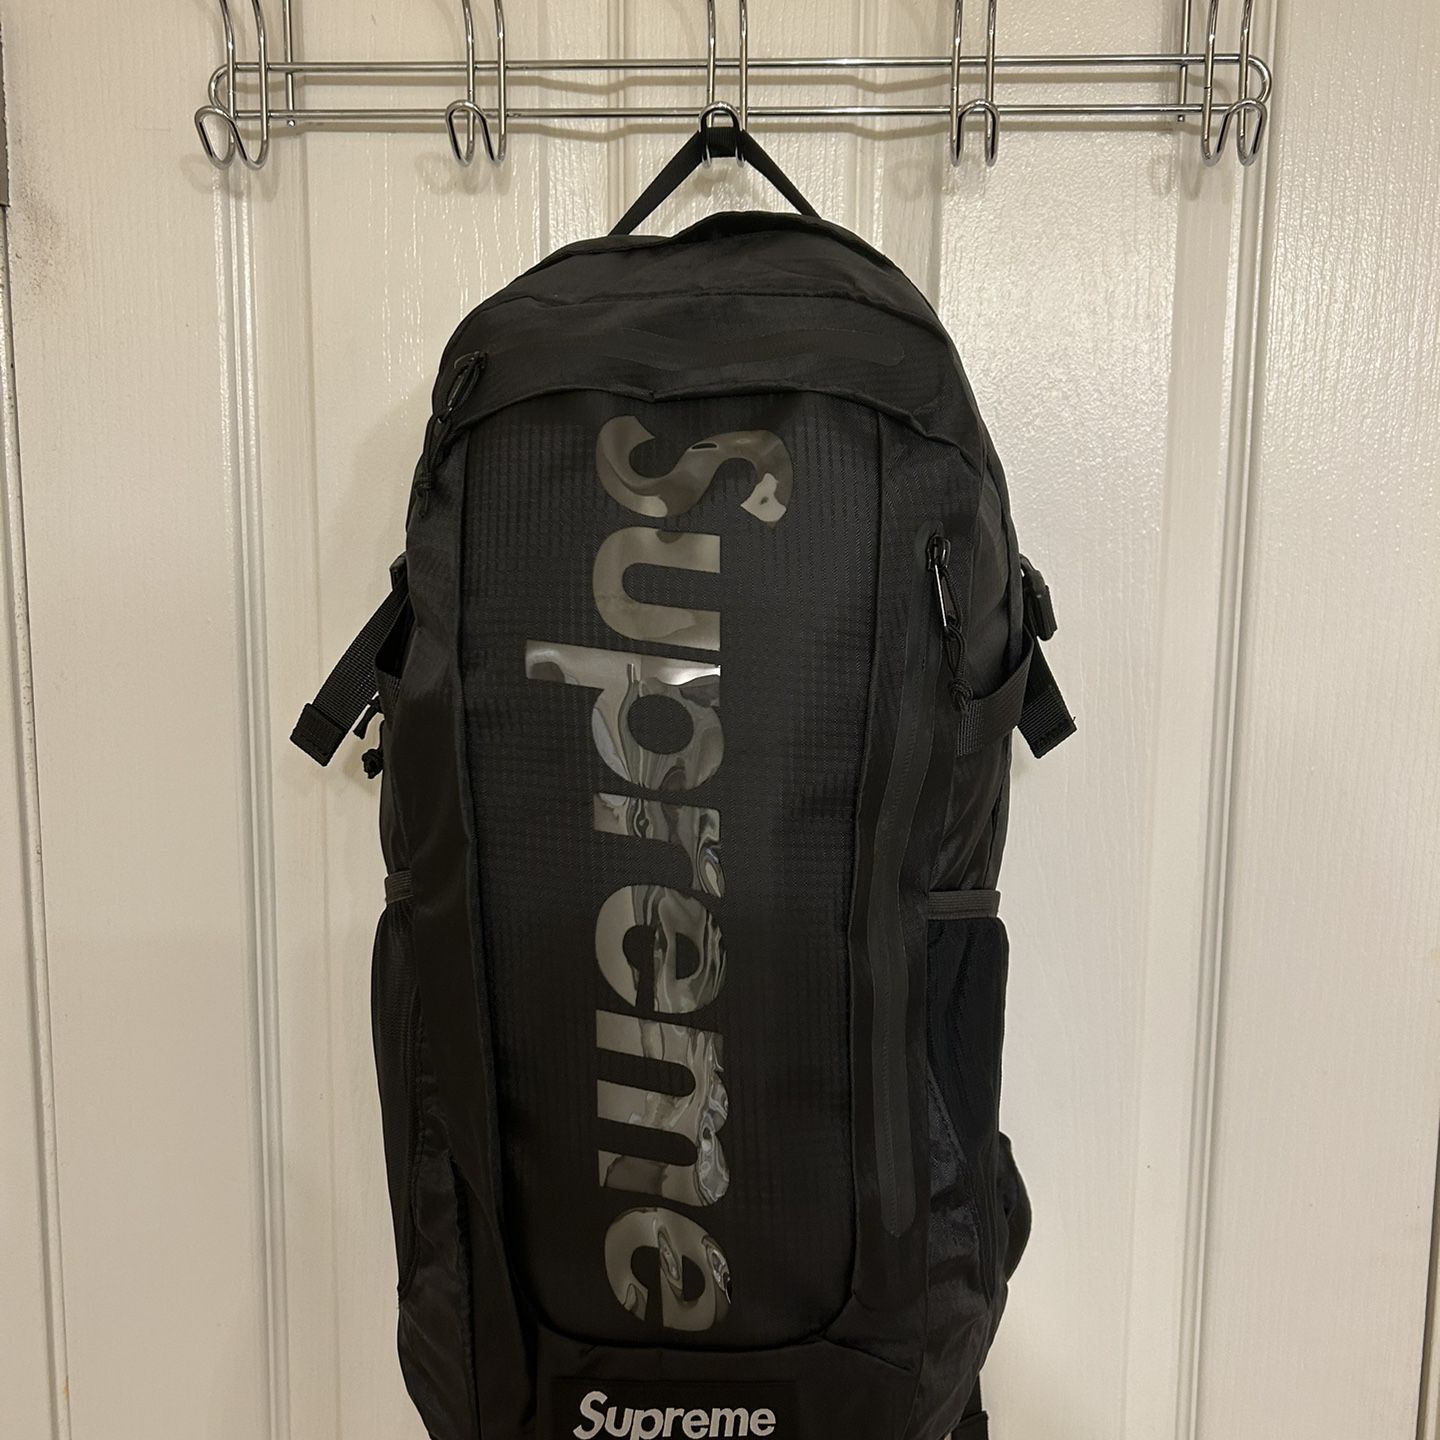 Supreme SS21 Clear-Cut Backpack (Black) for Sale in Irvine, CA - OfferUp